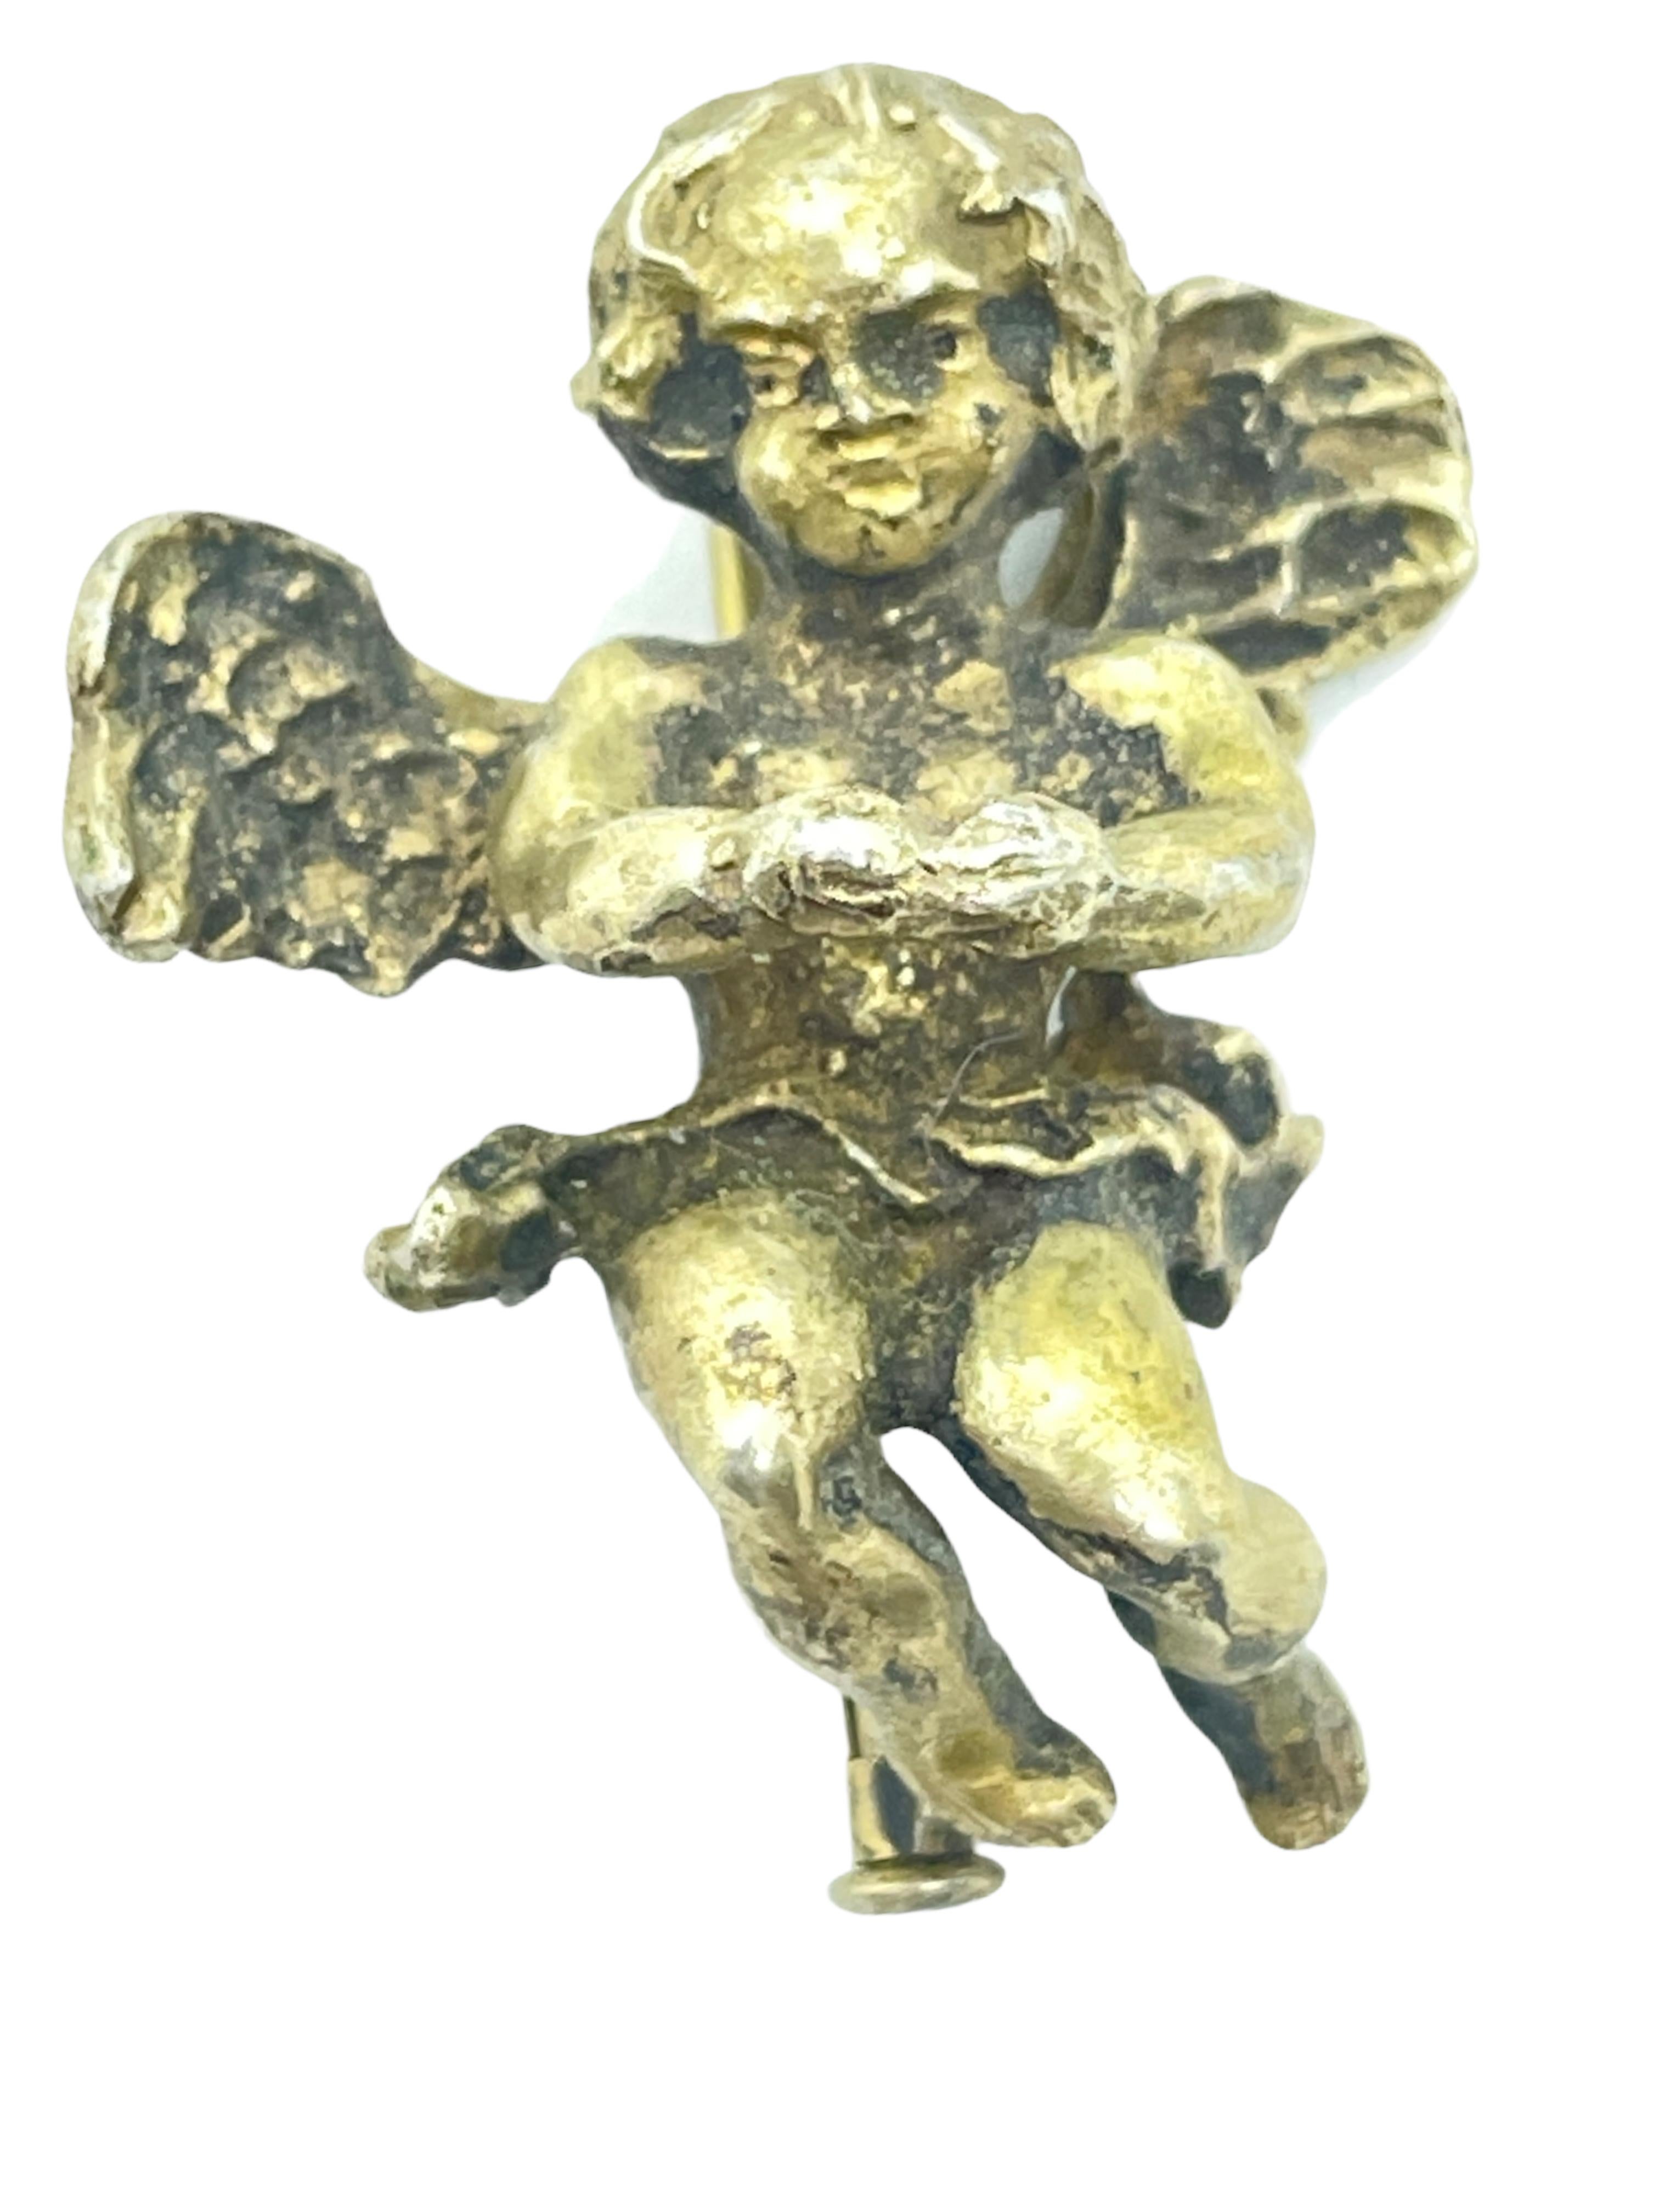 This lovely stylish Cherub angel brooch was made for a loved one. Made in Vienna, Austria, circa 1890s or older. It is made of solid silver, not pounced or marked. It weights about 16.1 Gramm or 0.57 OZ.
A very pretty piece of antique jewellery